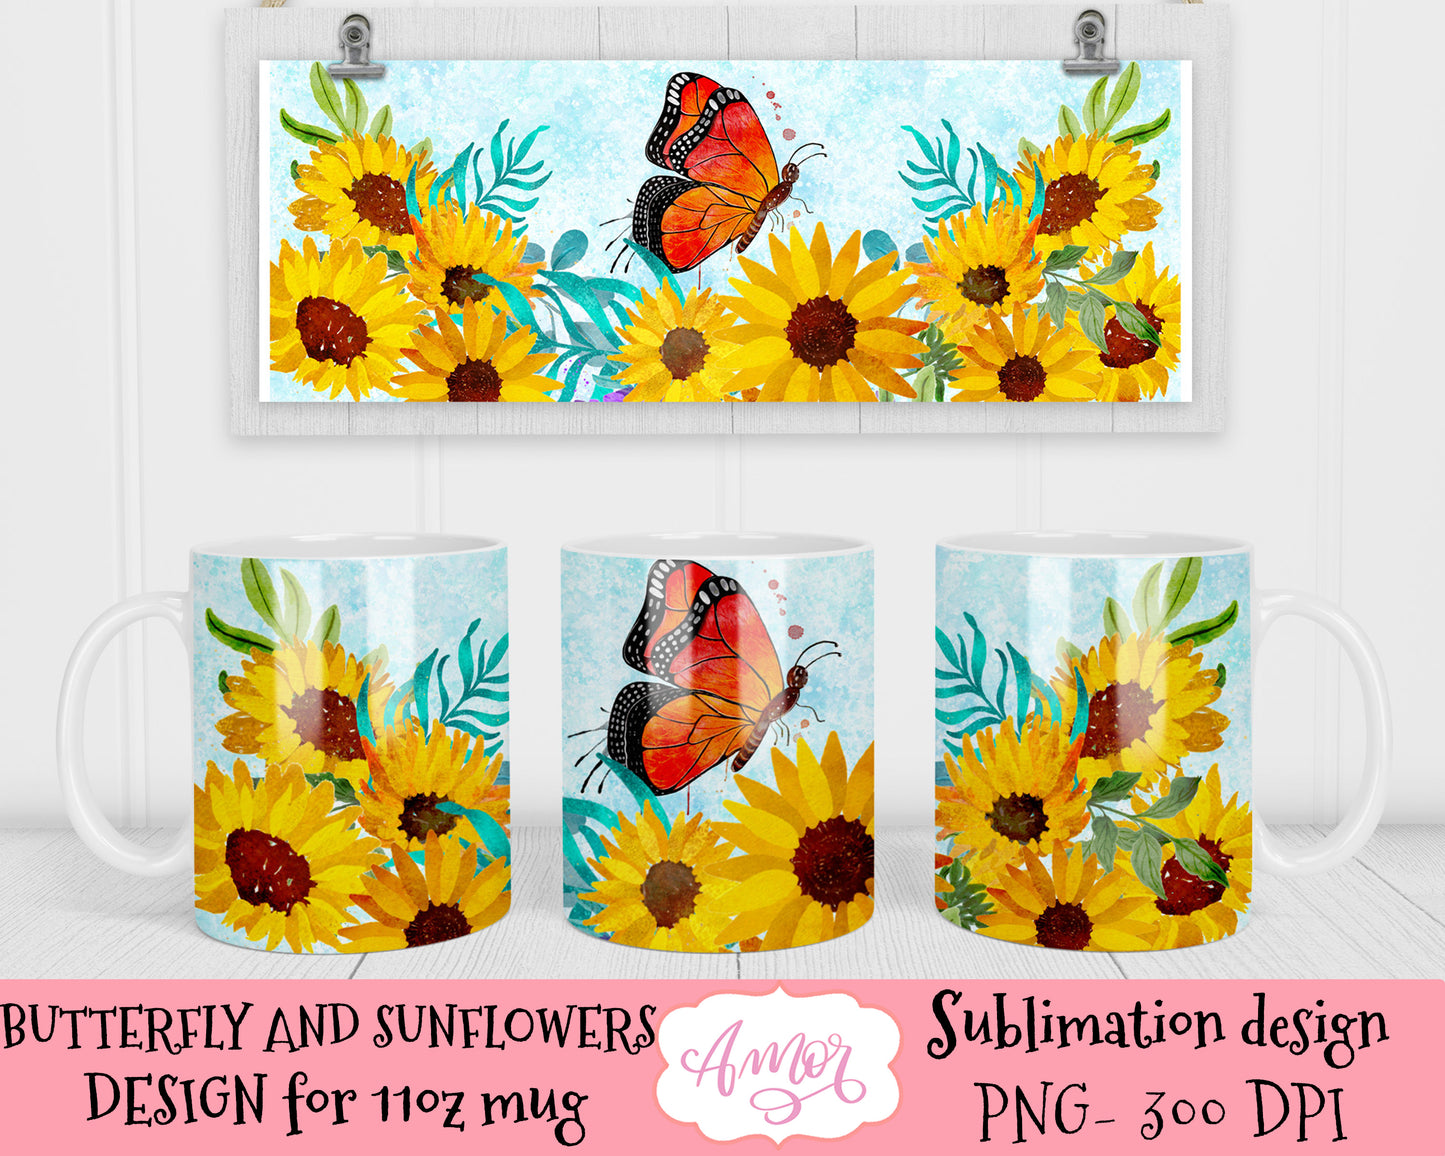 Sunflowers and Butterfly mug design for sublimation